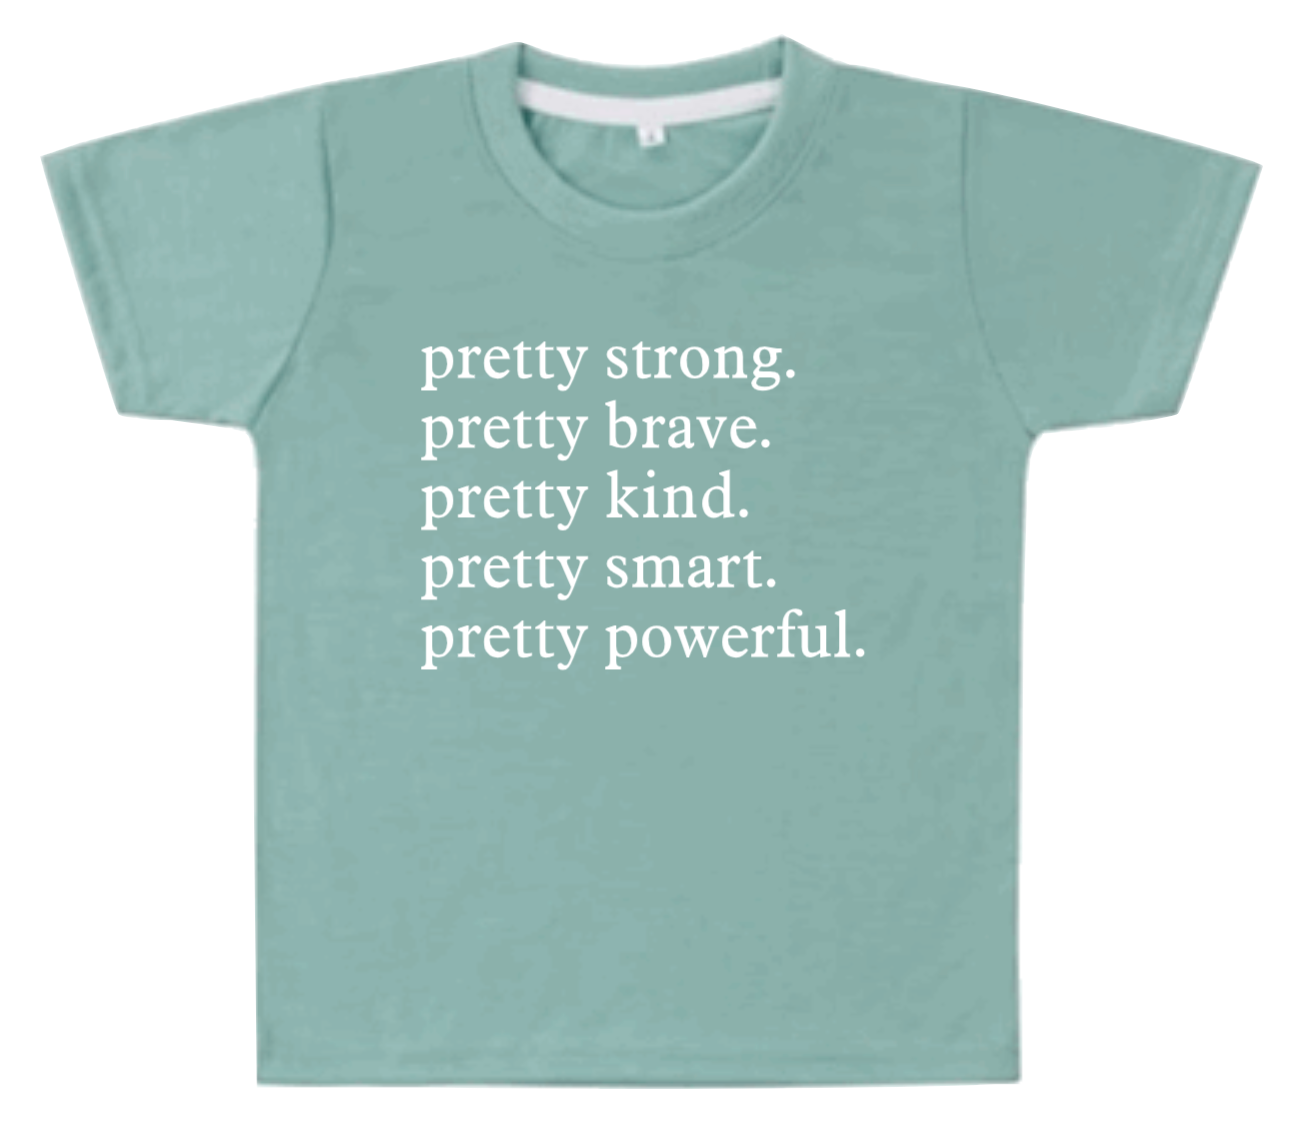 Pretty Strong, Brave, Kind, Smart, Powerful Onesie/Tee